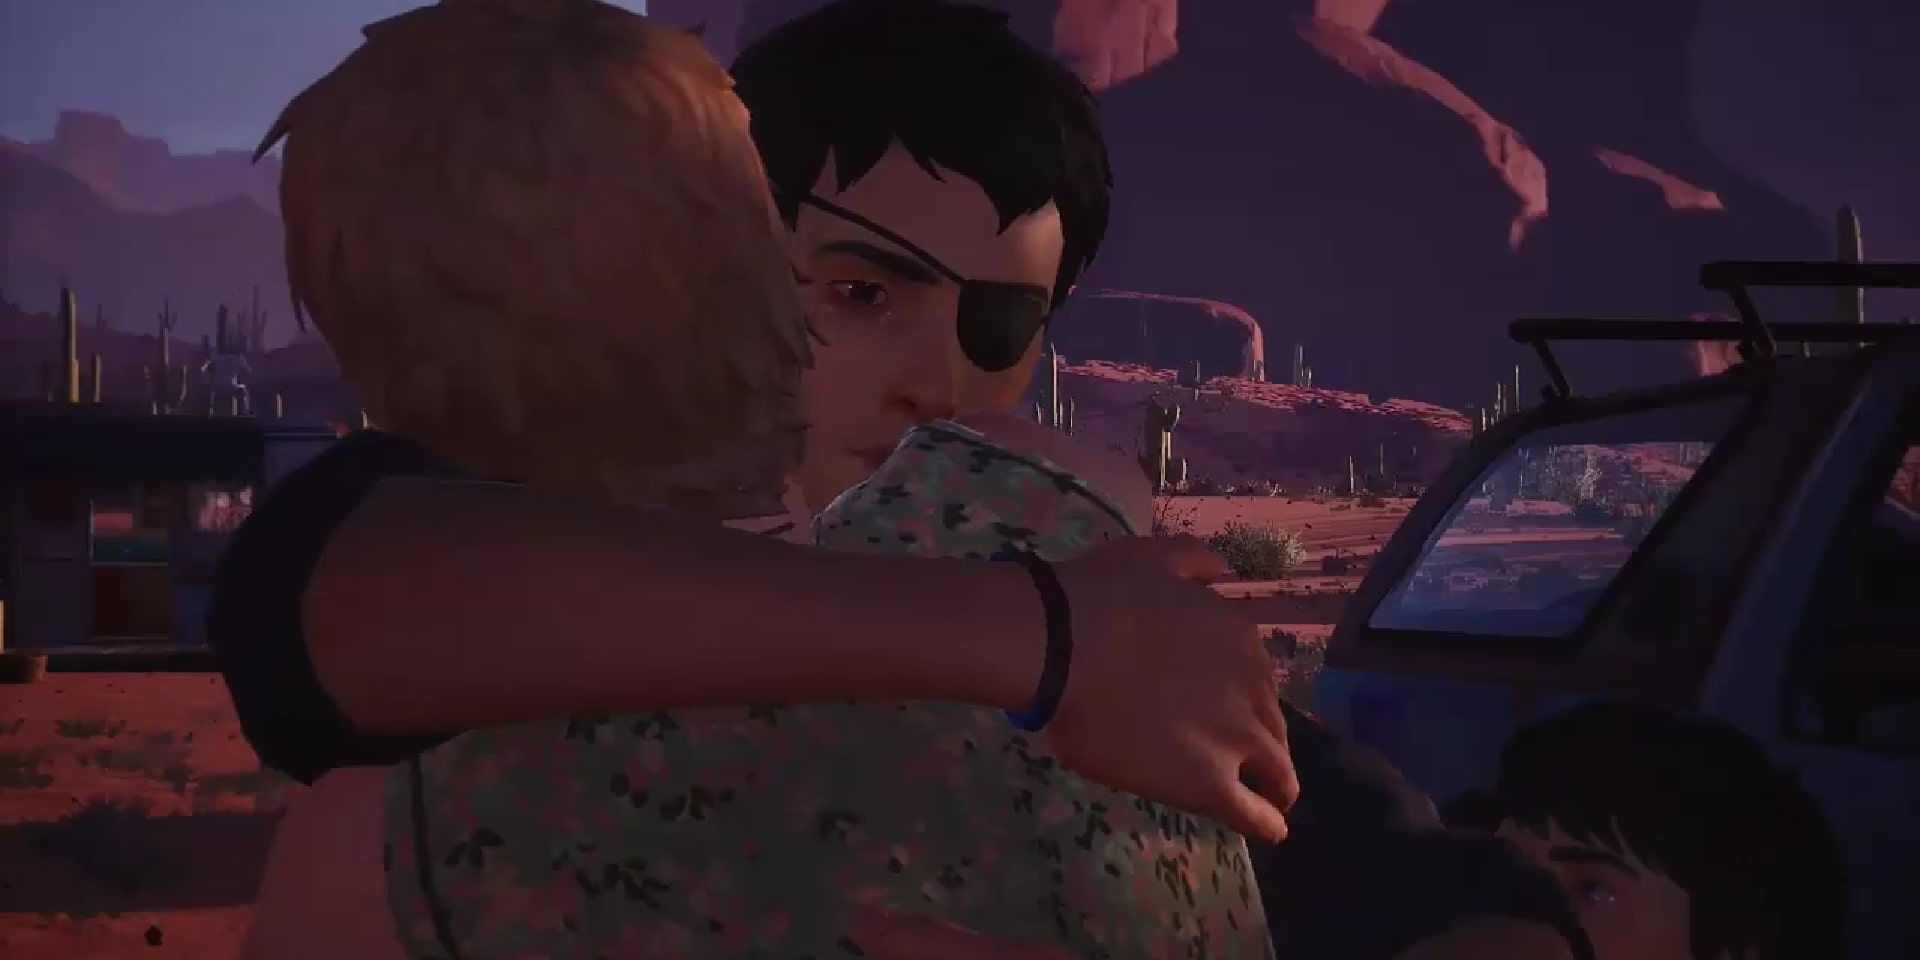 Sean embracing his mom in one of the most emotional moments of the game before heading for the Border in Life is Strange 2